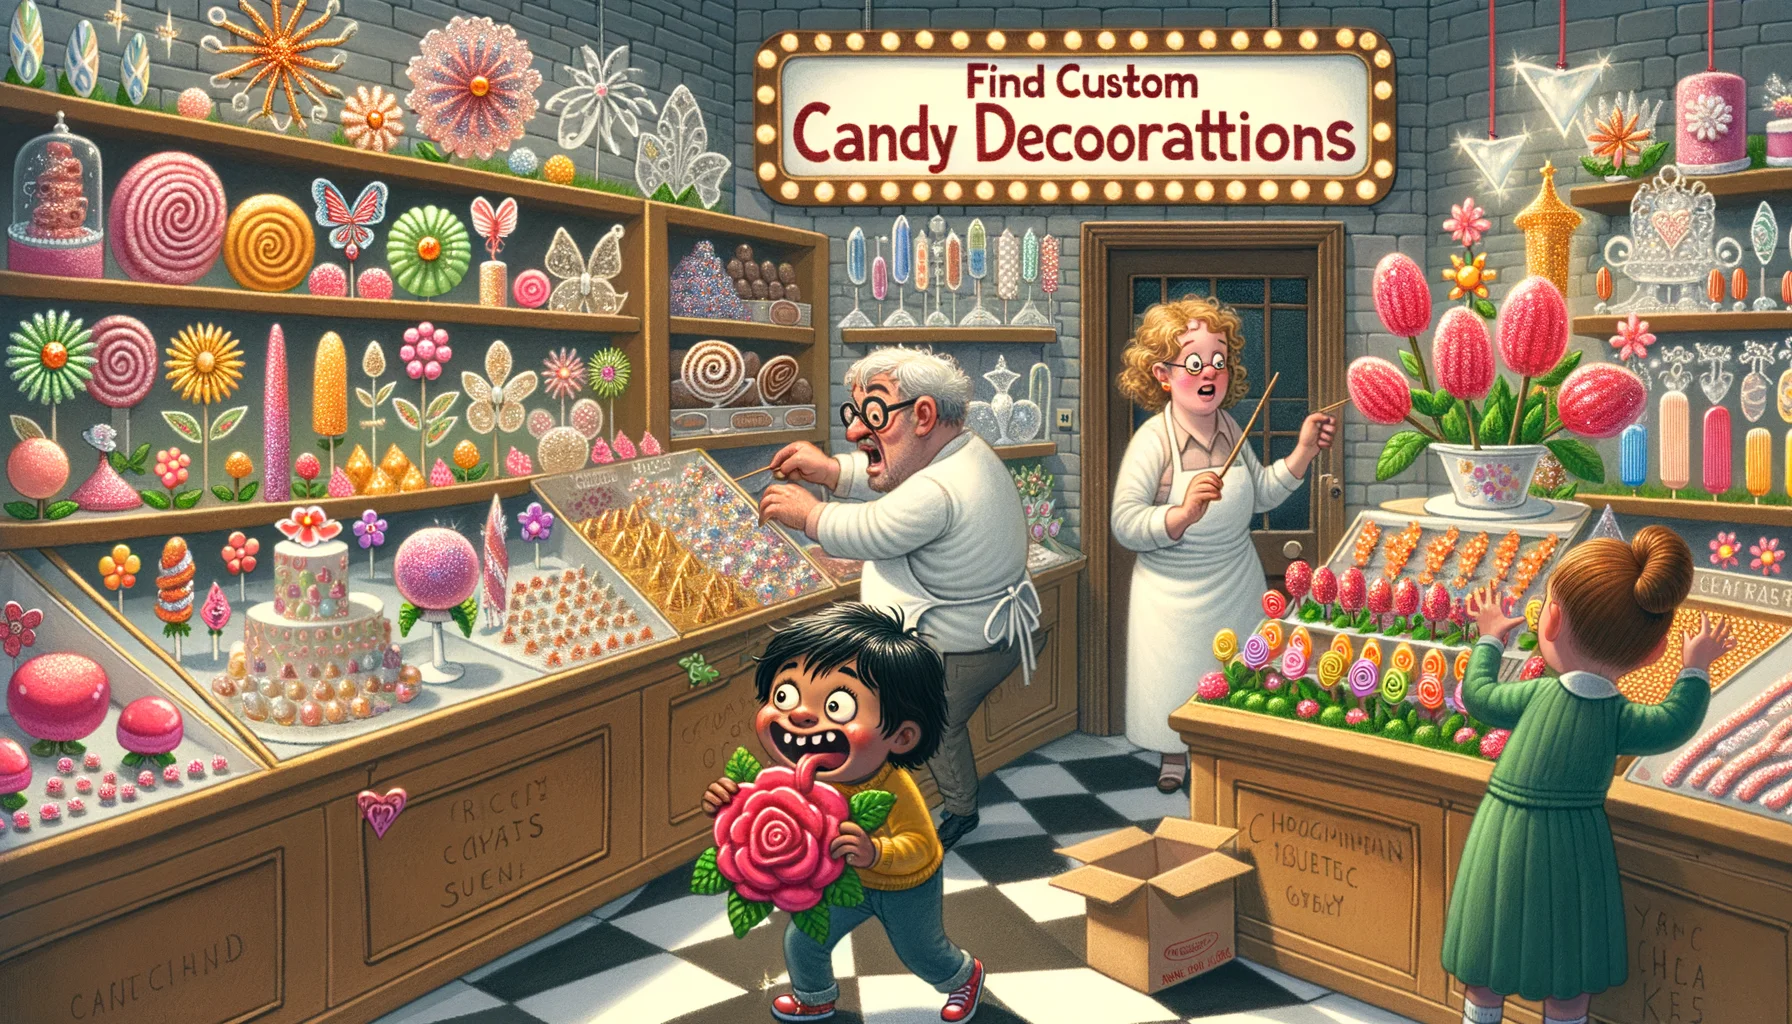 Imagine a playful scene in a bustling confectionery store. The shelves are filled to the brim with a myriad of custom candy decorations, each unique and radiant. From sugar-spun flowers to intricate candy figurines, marzipan eyecandy and chocolate sculptures, every tiny detail is meticulously crafted. A baffled Caucasian shopkeeper is trying to keep up with the demand, rushing around with stacks of boxes filled with candy assortments. Meanwhile, an amused South Asian kid with shimmering eyes is secretly trying to choose a sparkly candy butterfly, and a Hispanic woman is laughing openly at the scene while elegantly picking a carmine red sugar rose. The sign reading 'Find Custom Candy Decorations' hangs brightly above, contributing to the overall humorous and sweet atmosphere.